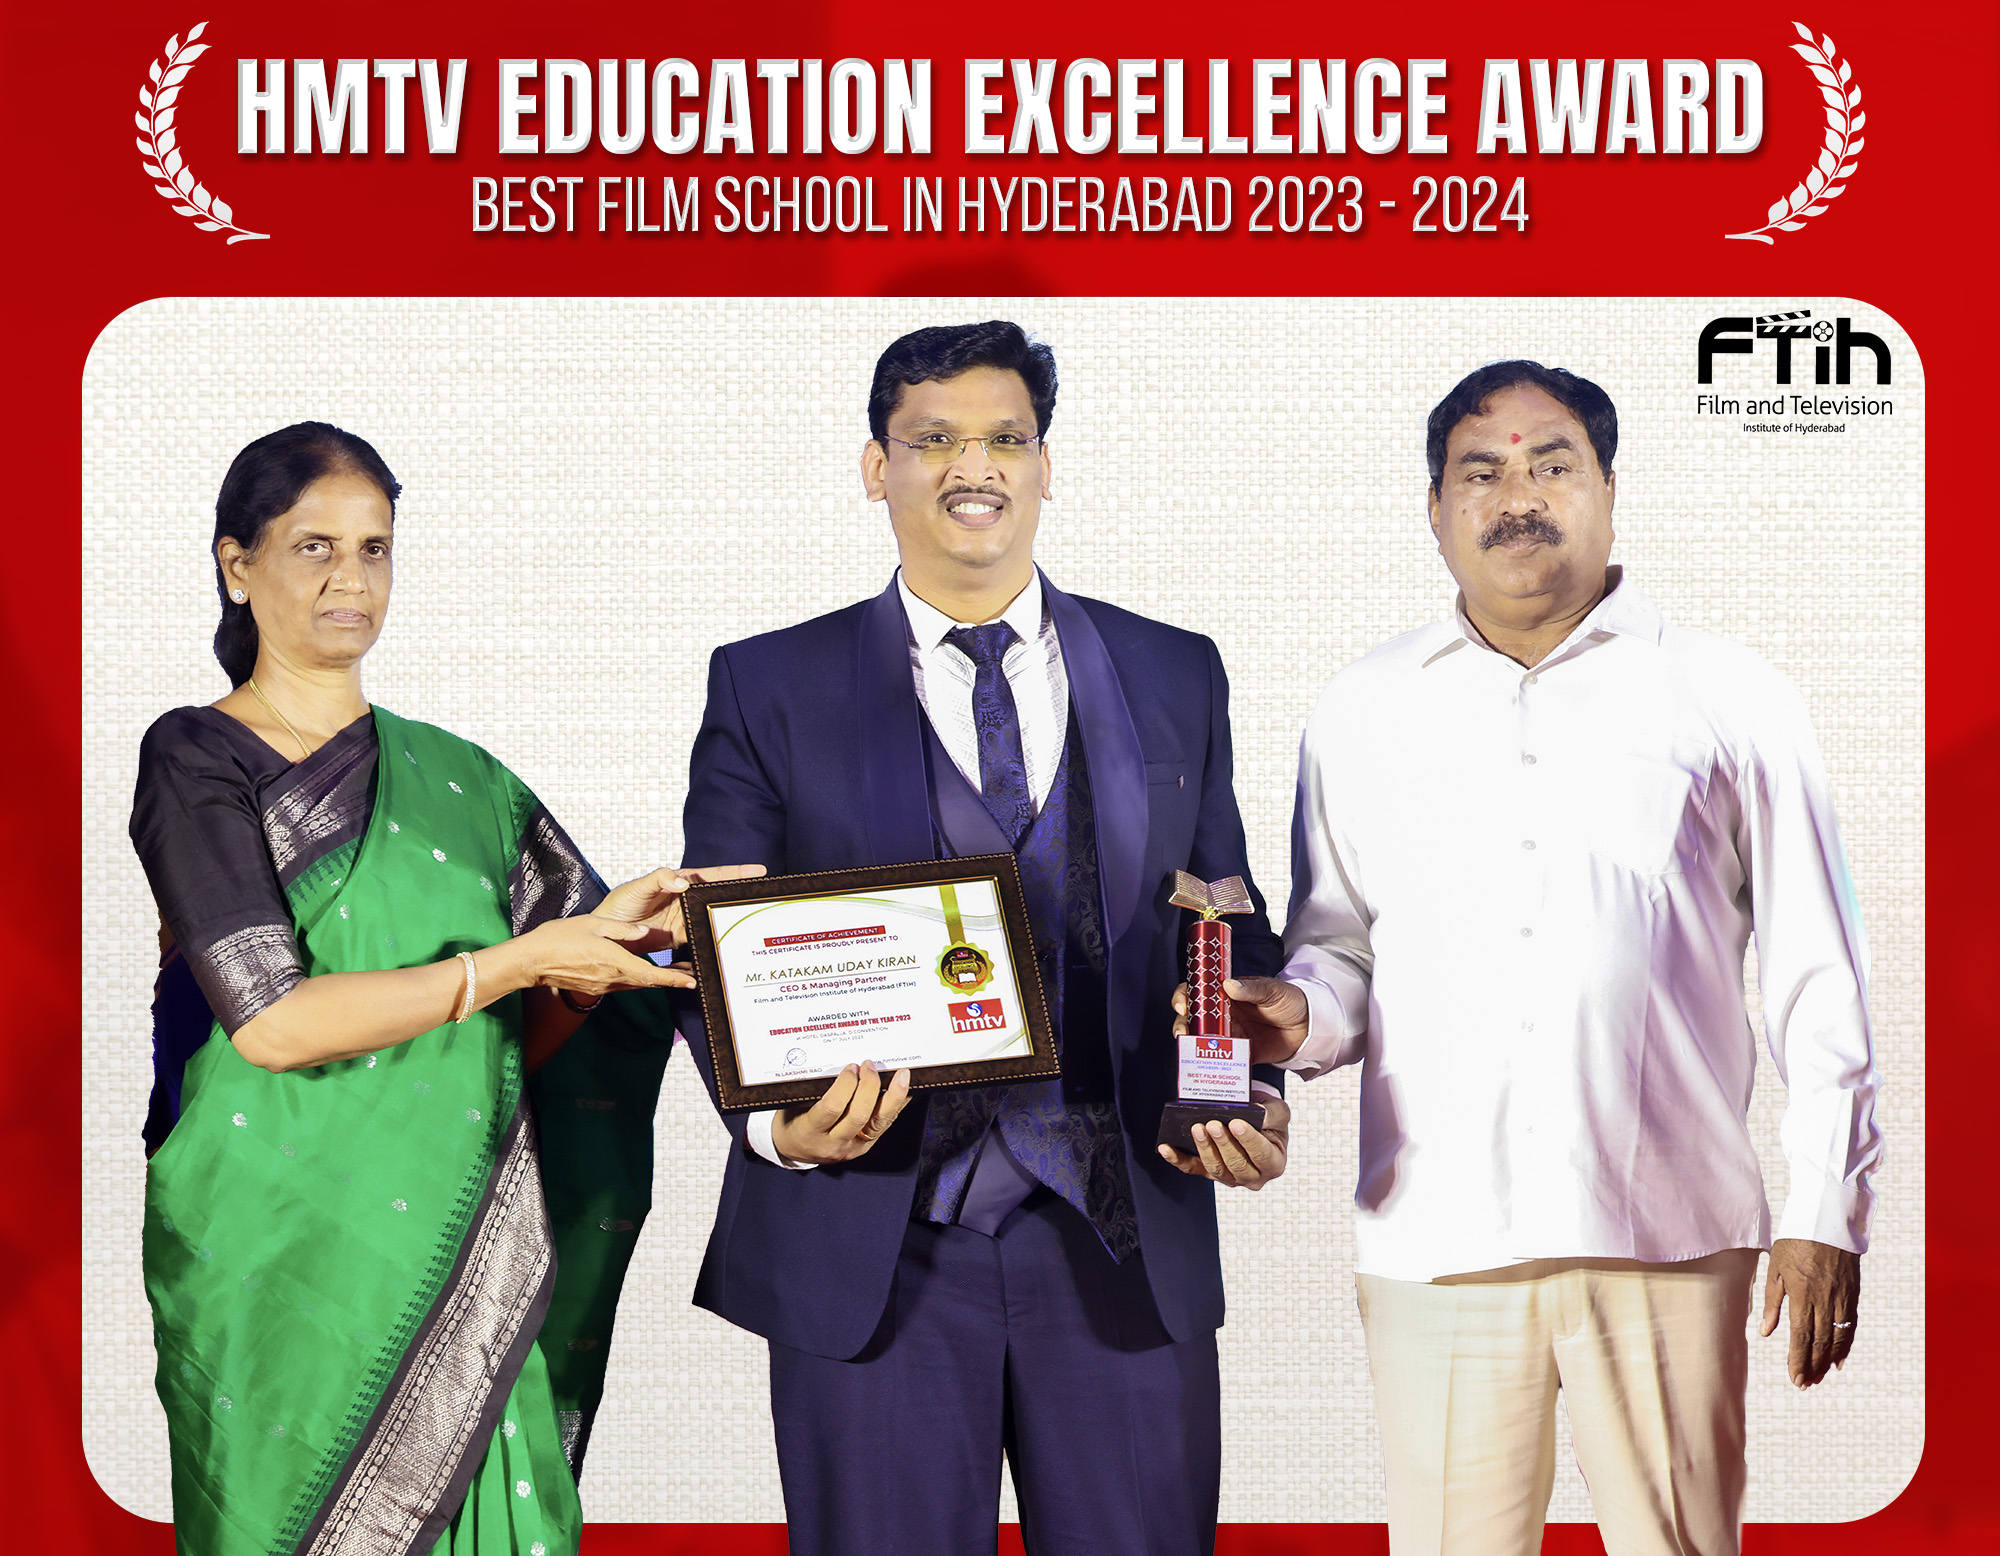 Education Excellence Awards-2023 thumbnail: A group of diverse individuals holding awards, representing the recognition of excellence in the education sector of Telugu-speaking states